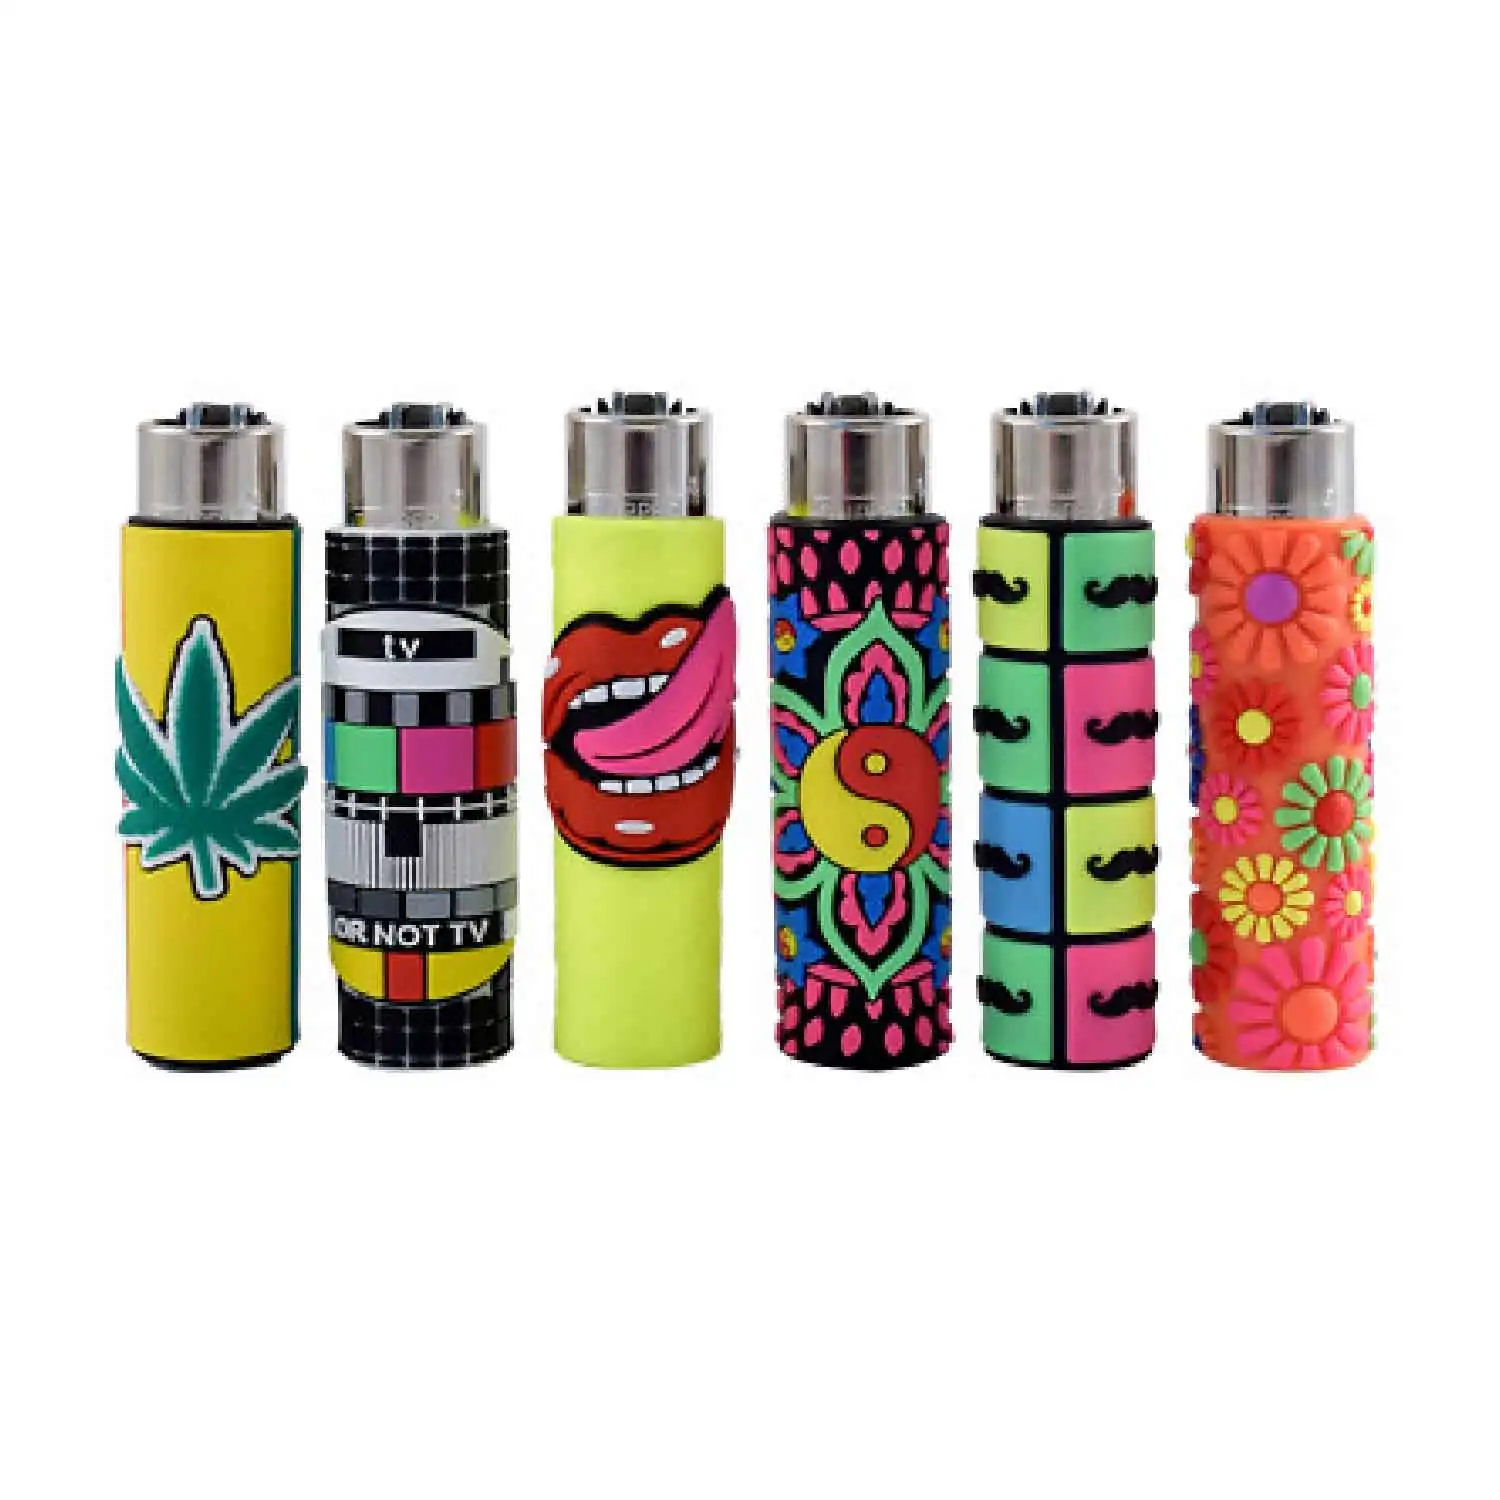 Clipper lighter pop cover - Buy at Real Tobacco